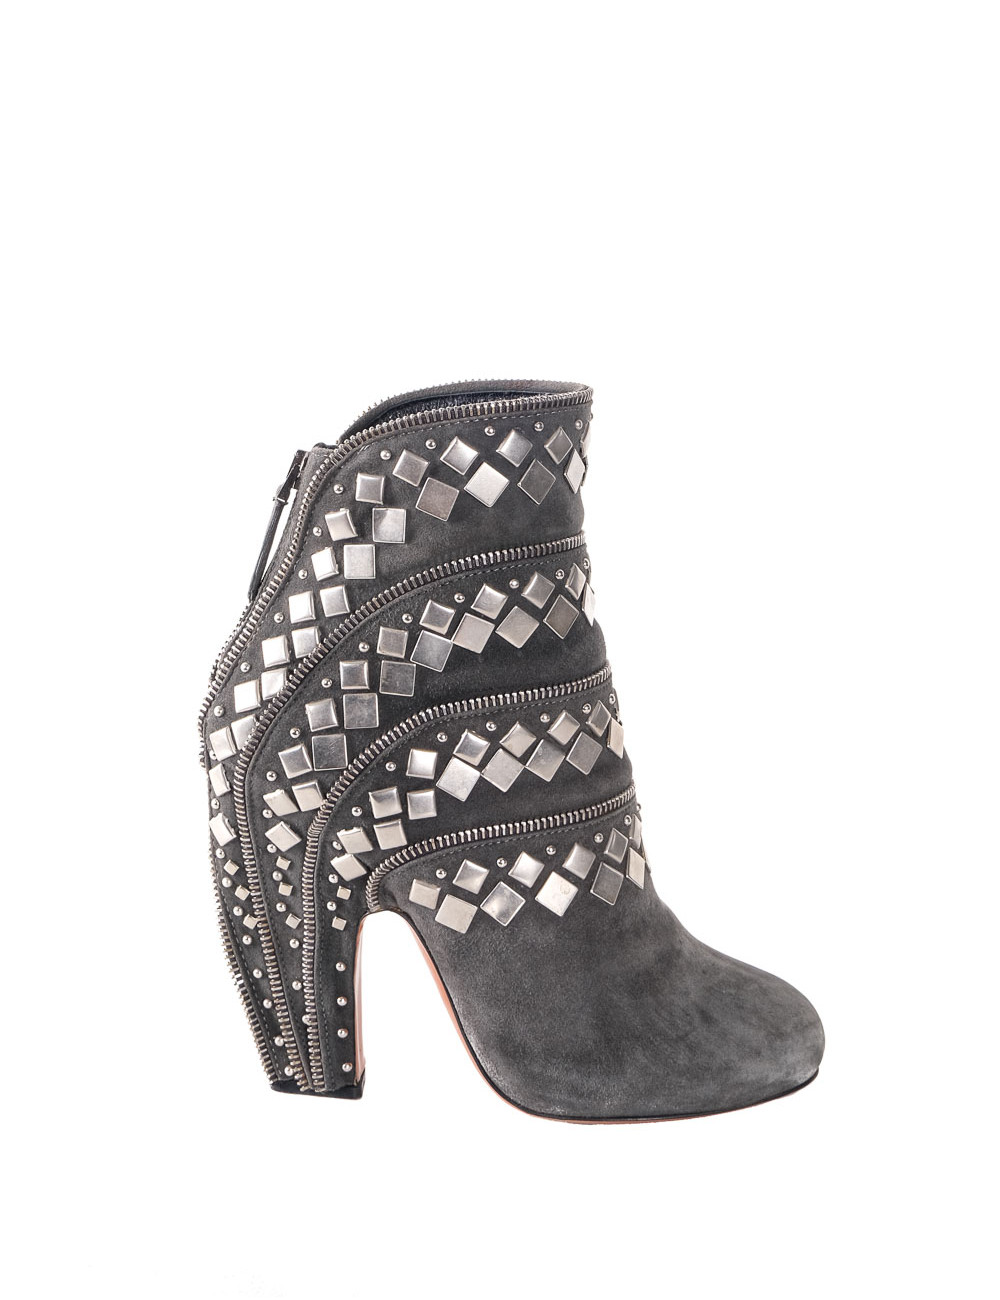 Grey Studded Ankle Boots on Sale | medialit.org